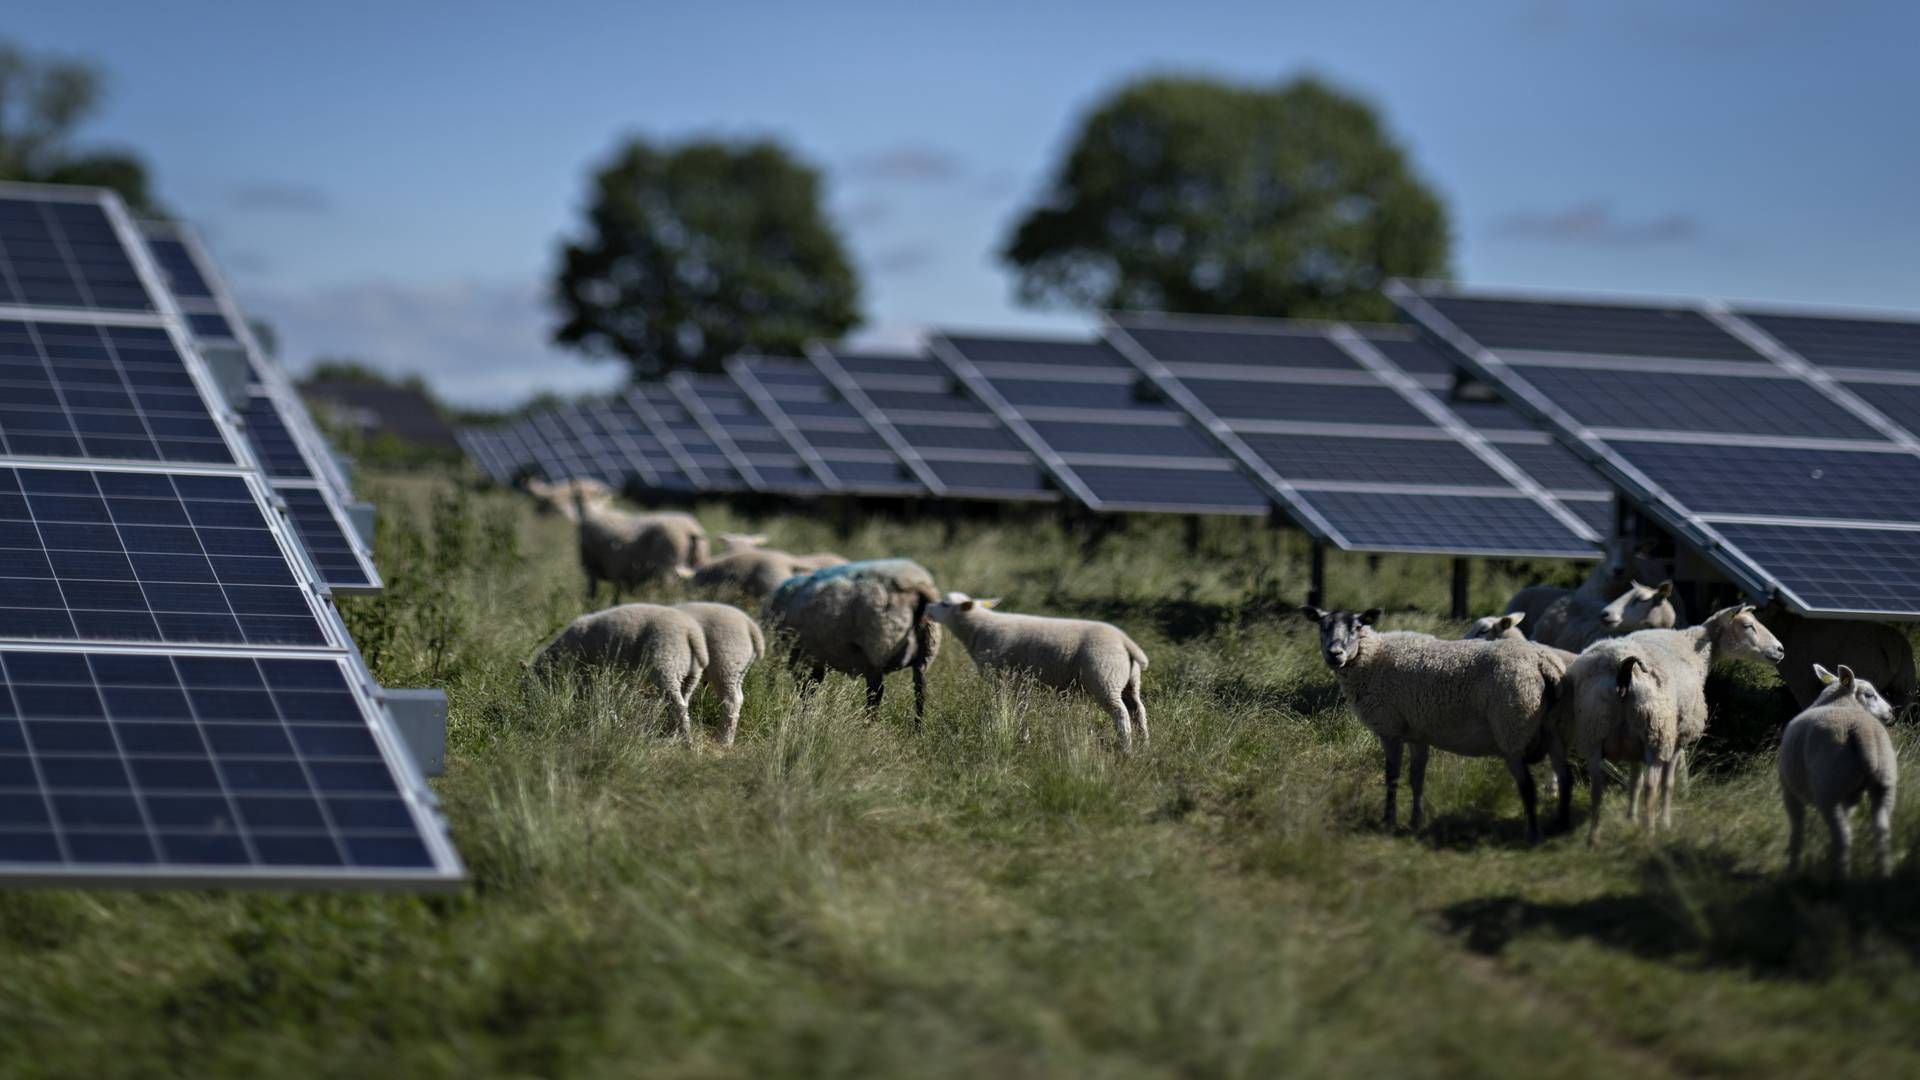 Electricity generated from solar projects across Europe advanced during the summer months, according to new report. | Photo: Brian Karmark/ERH